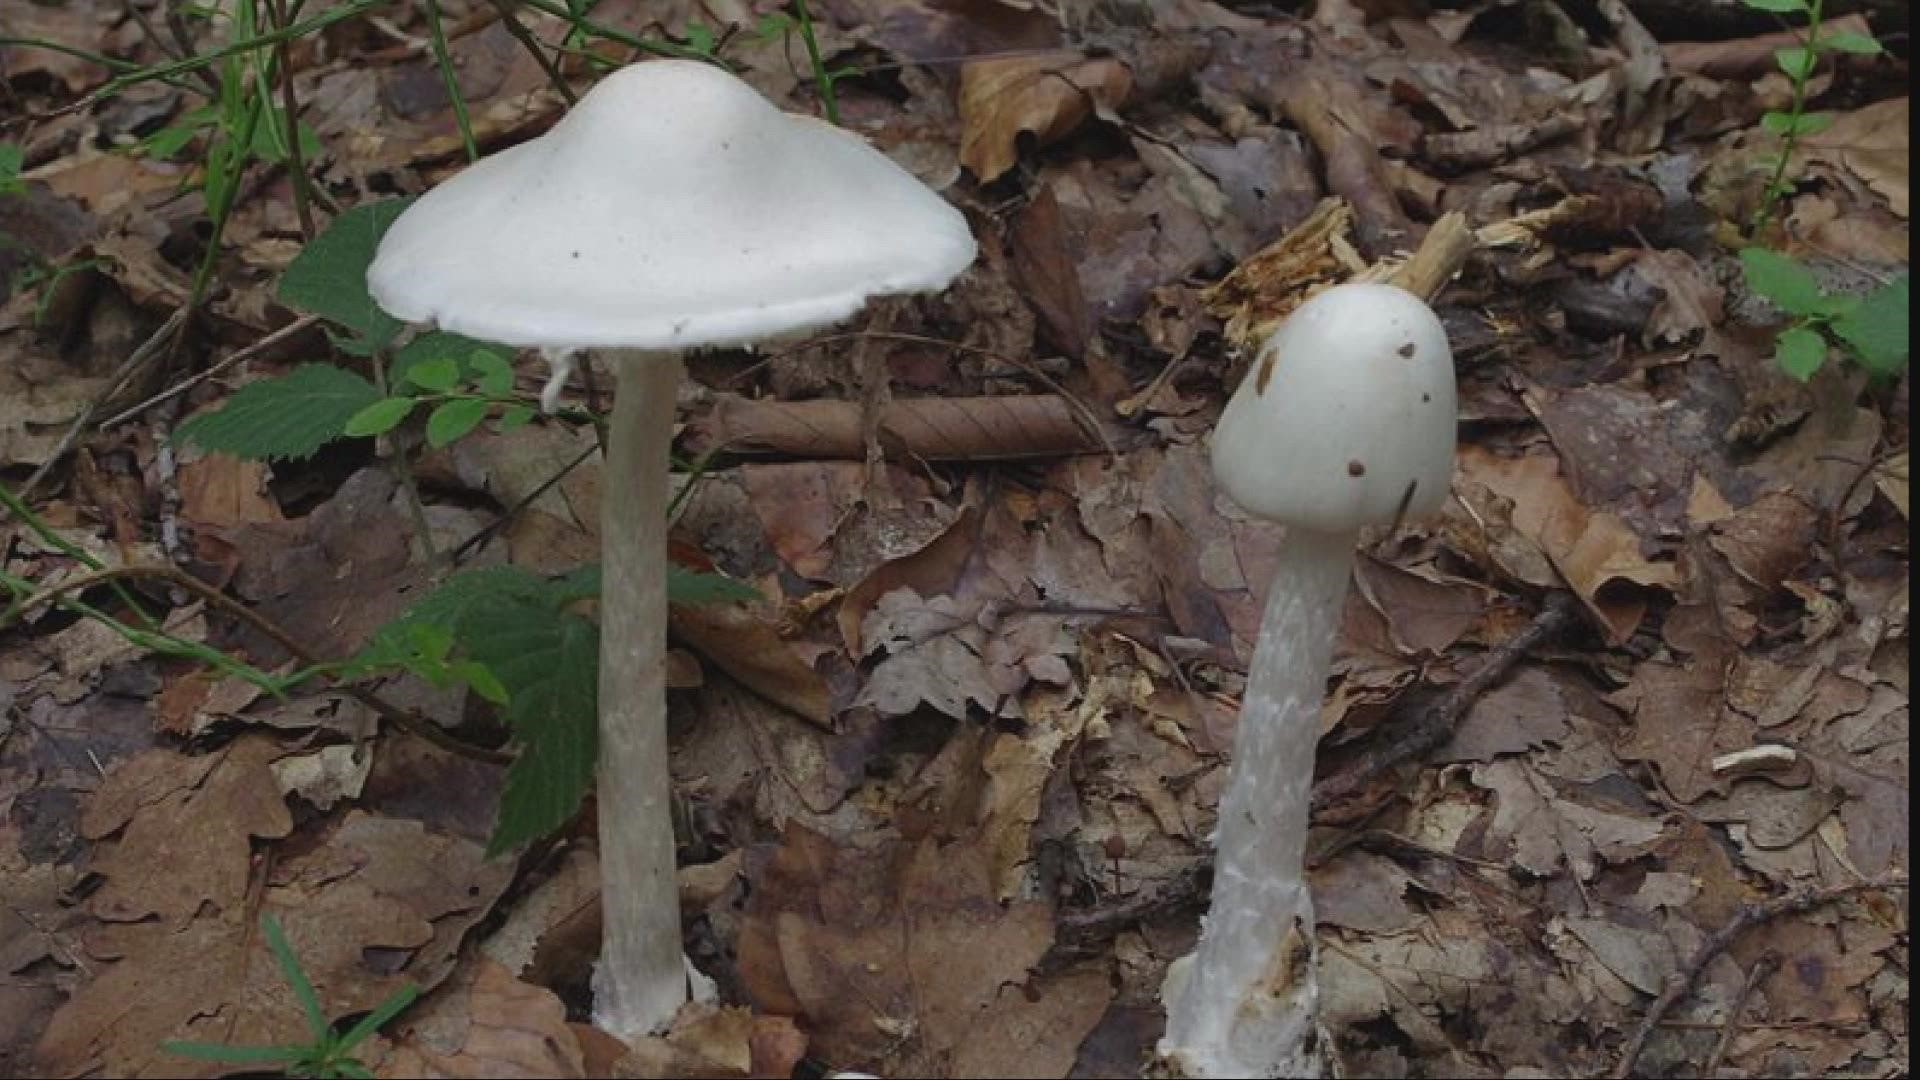 Mushroom poisoning is real – and it can cause liver failure and even death. And yes, deadly mushrooms grow in Northeast Ohio.